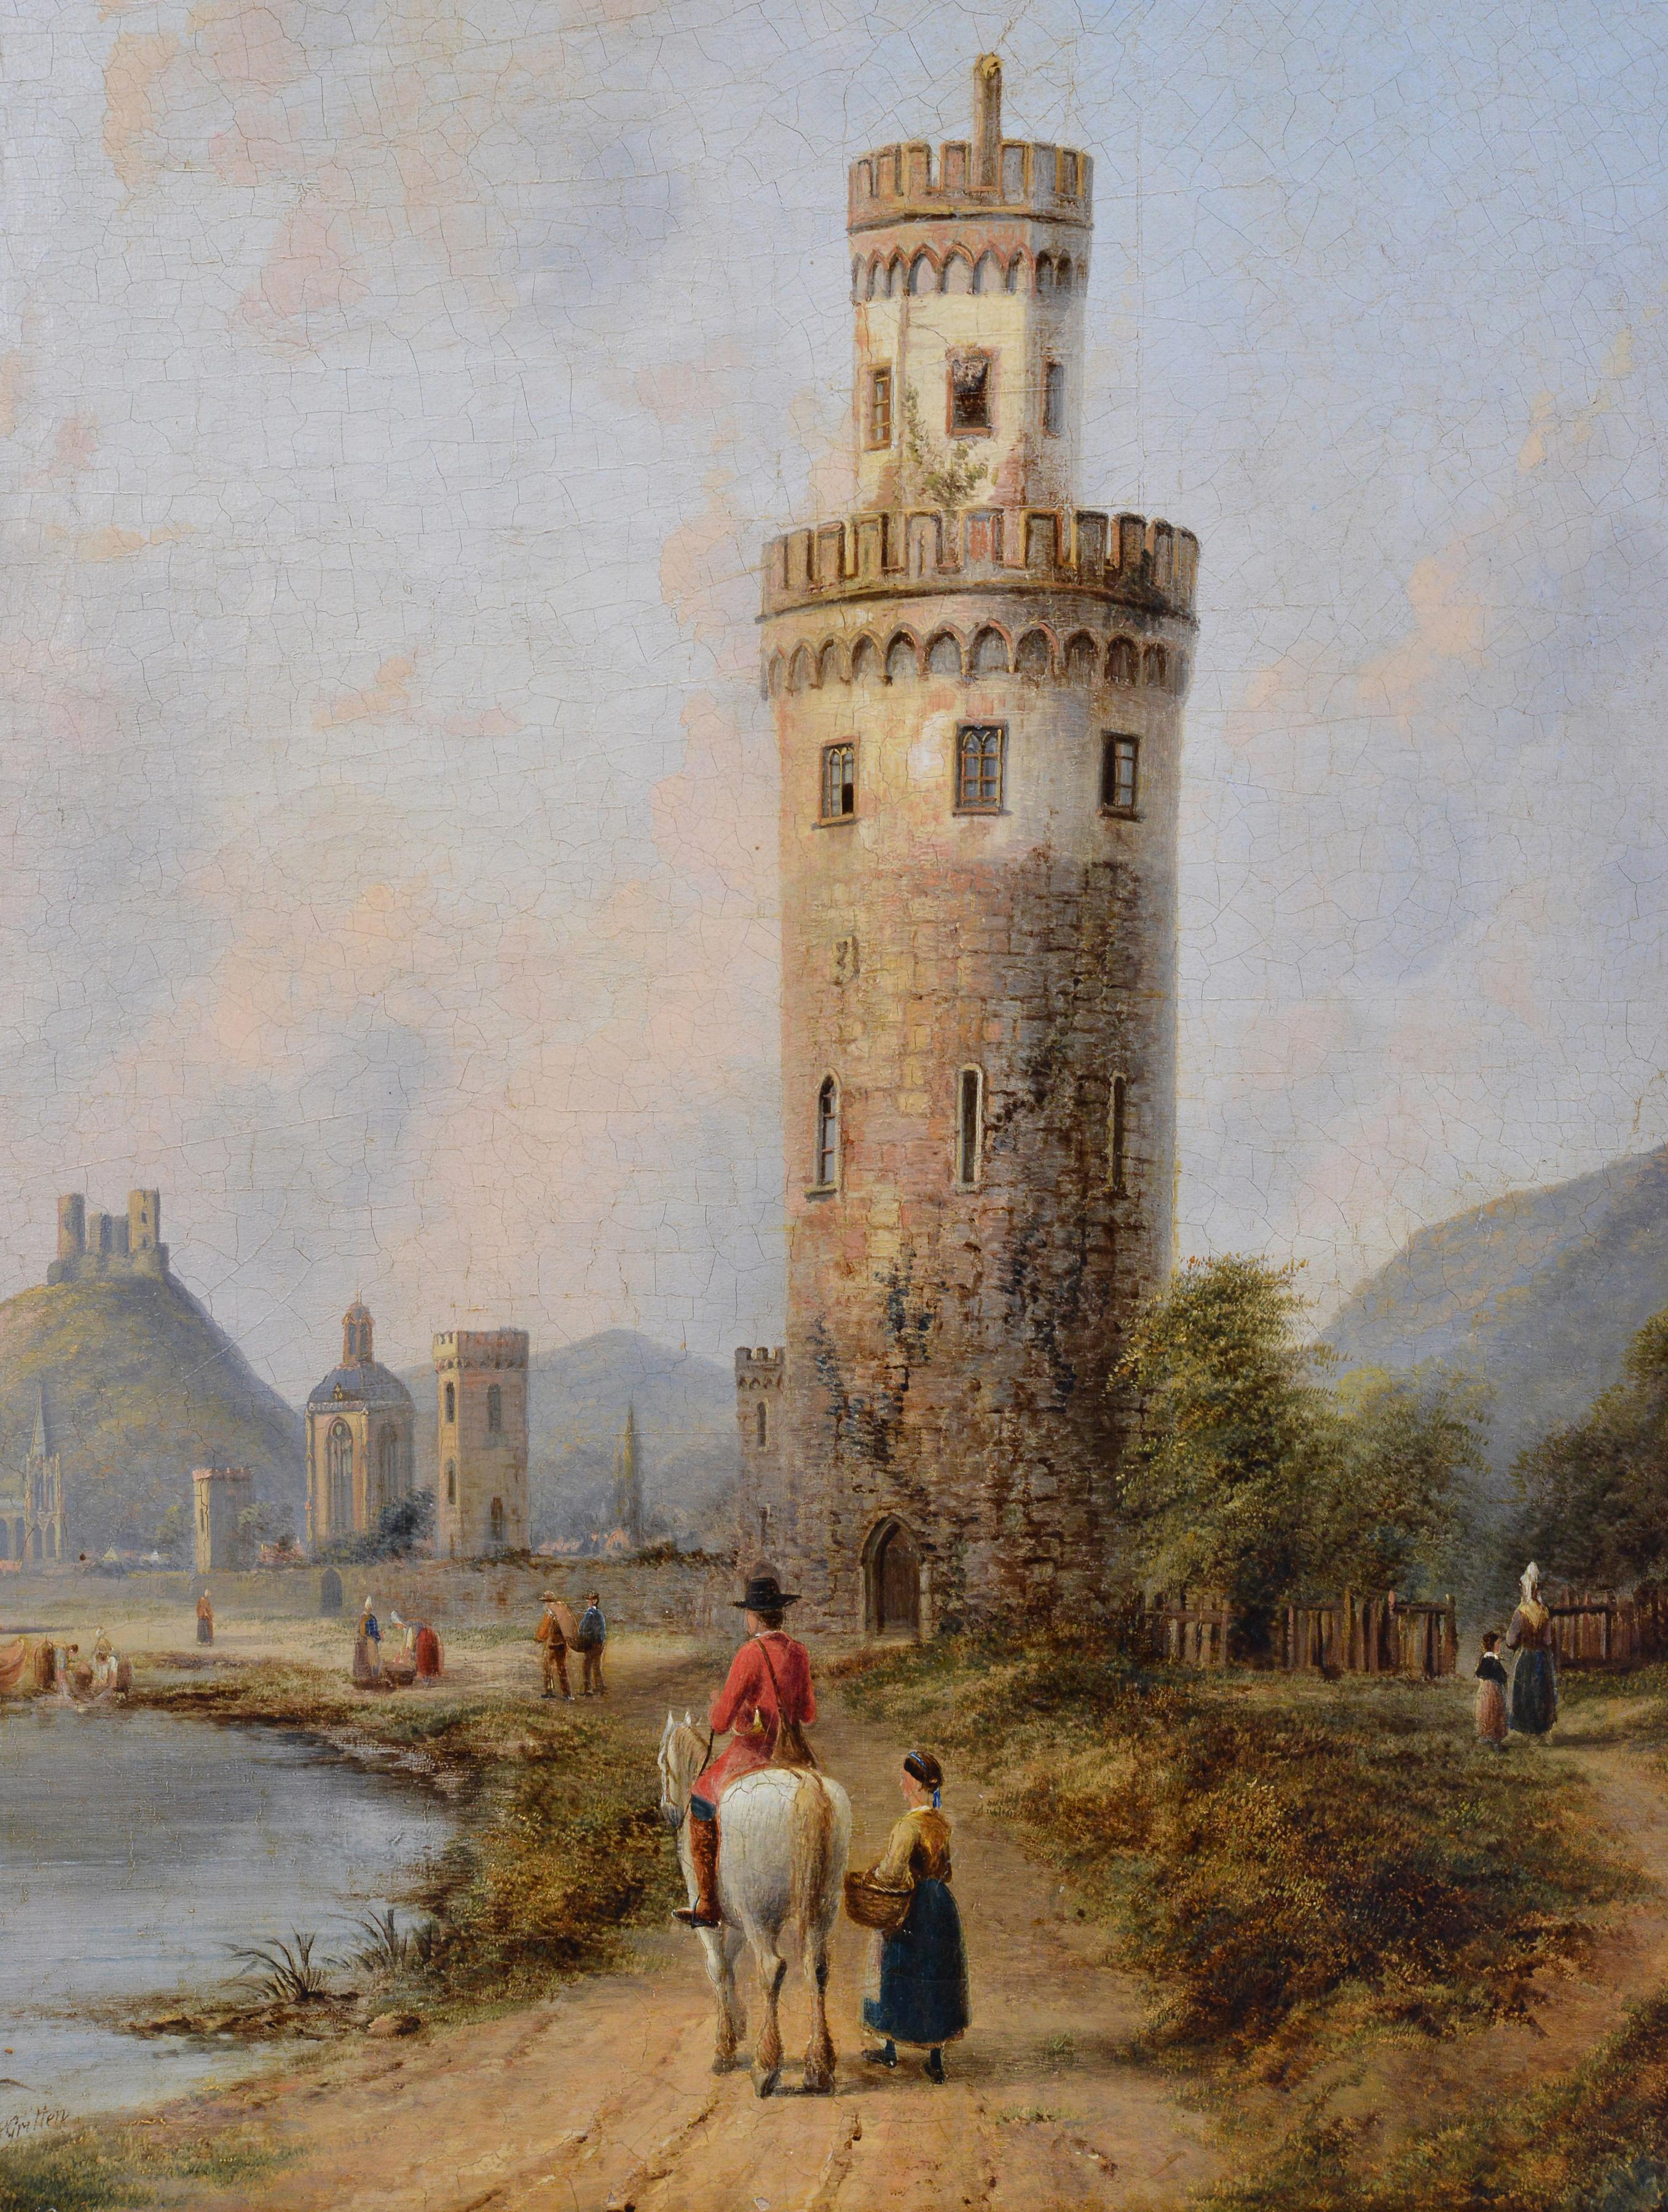 Painting is signed “H. Gritten” in the lower center. Spectacular depiction of one of most picturesque town on the middle Rhein was painted in the mid-19th century by British artist Henry Gritten (1818 –1873) who traversed the world extensively in